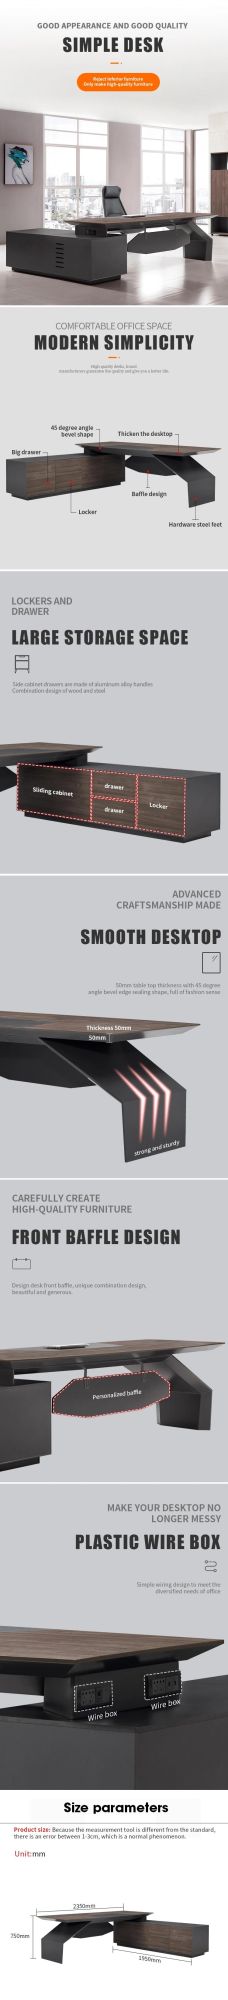 New Modern Melamine MDF Furniture L Shaped Wooden Manager Boss CEO Desk Executive Office Table